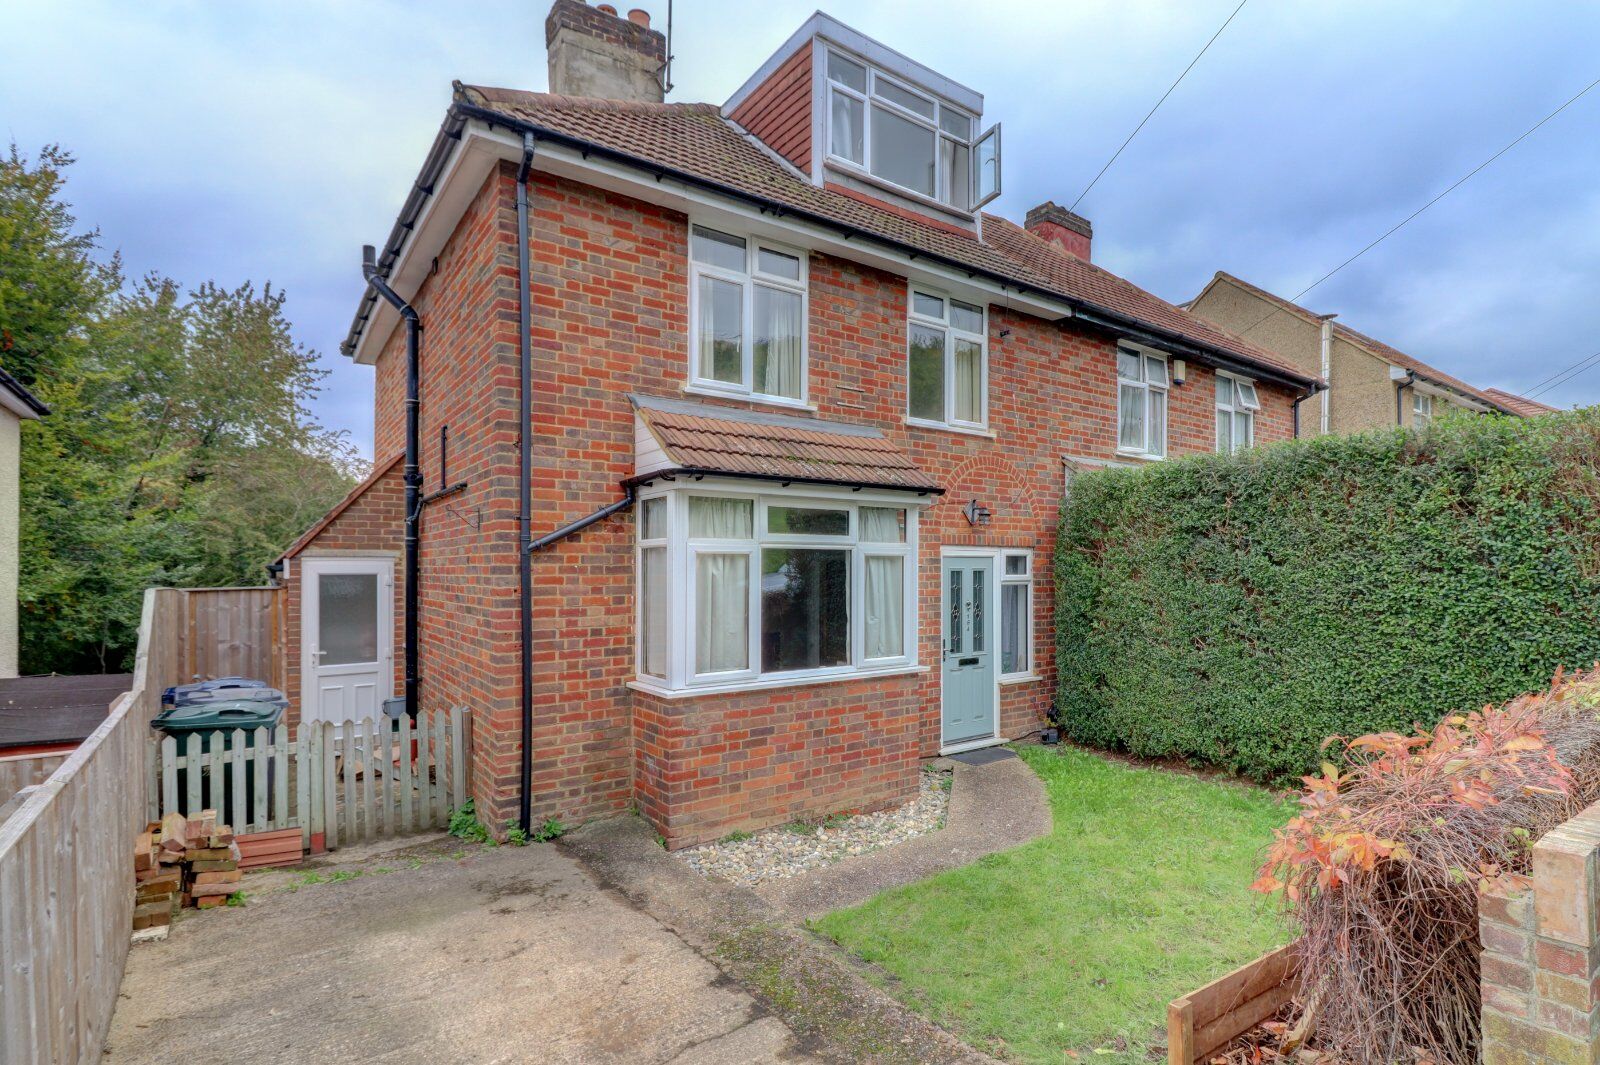 3 bedroom semi detached house for sale Dashwood Avenue, High Wycombe, HP12, main image